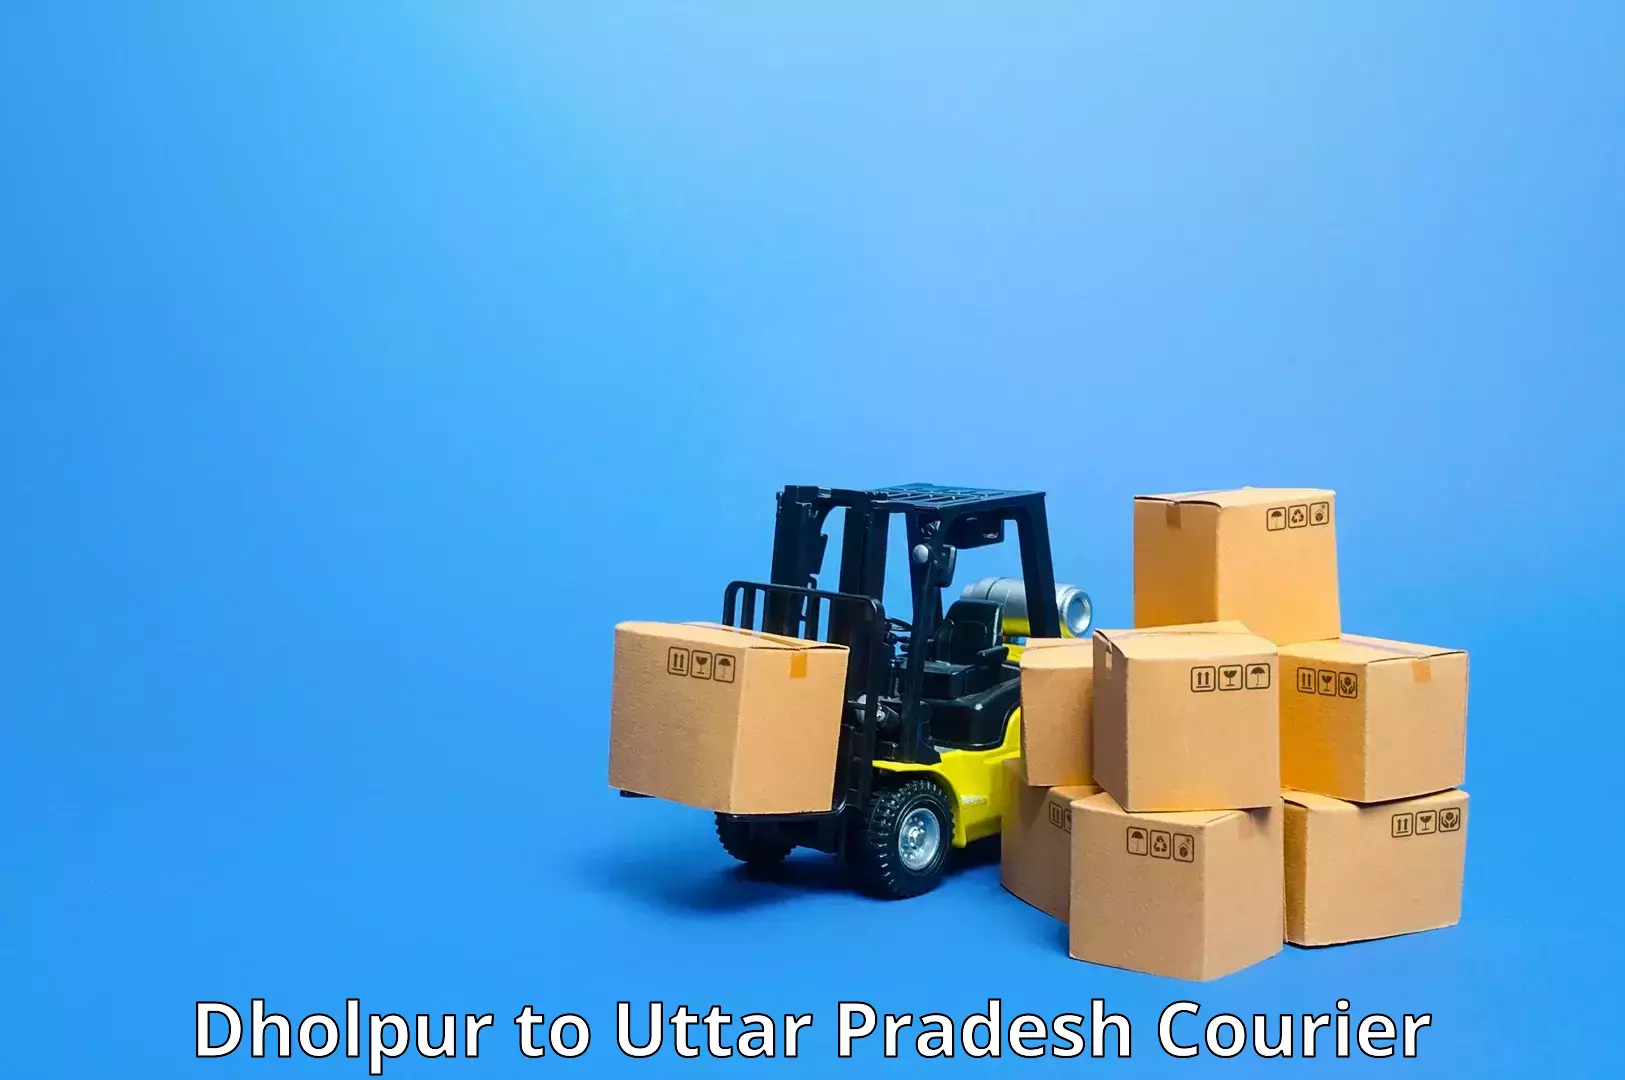 Express logistics providers Dholpur to Ghosi